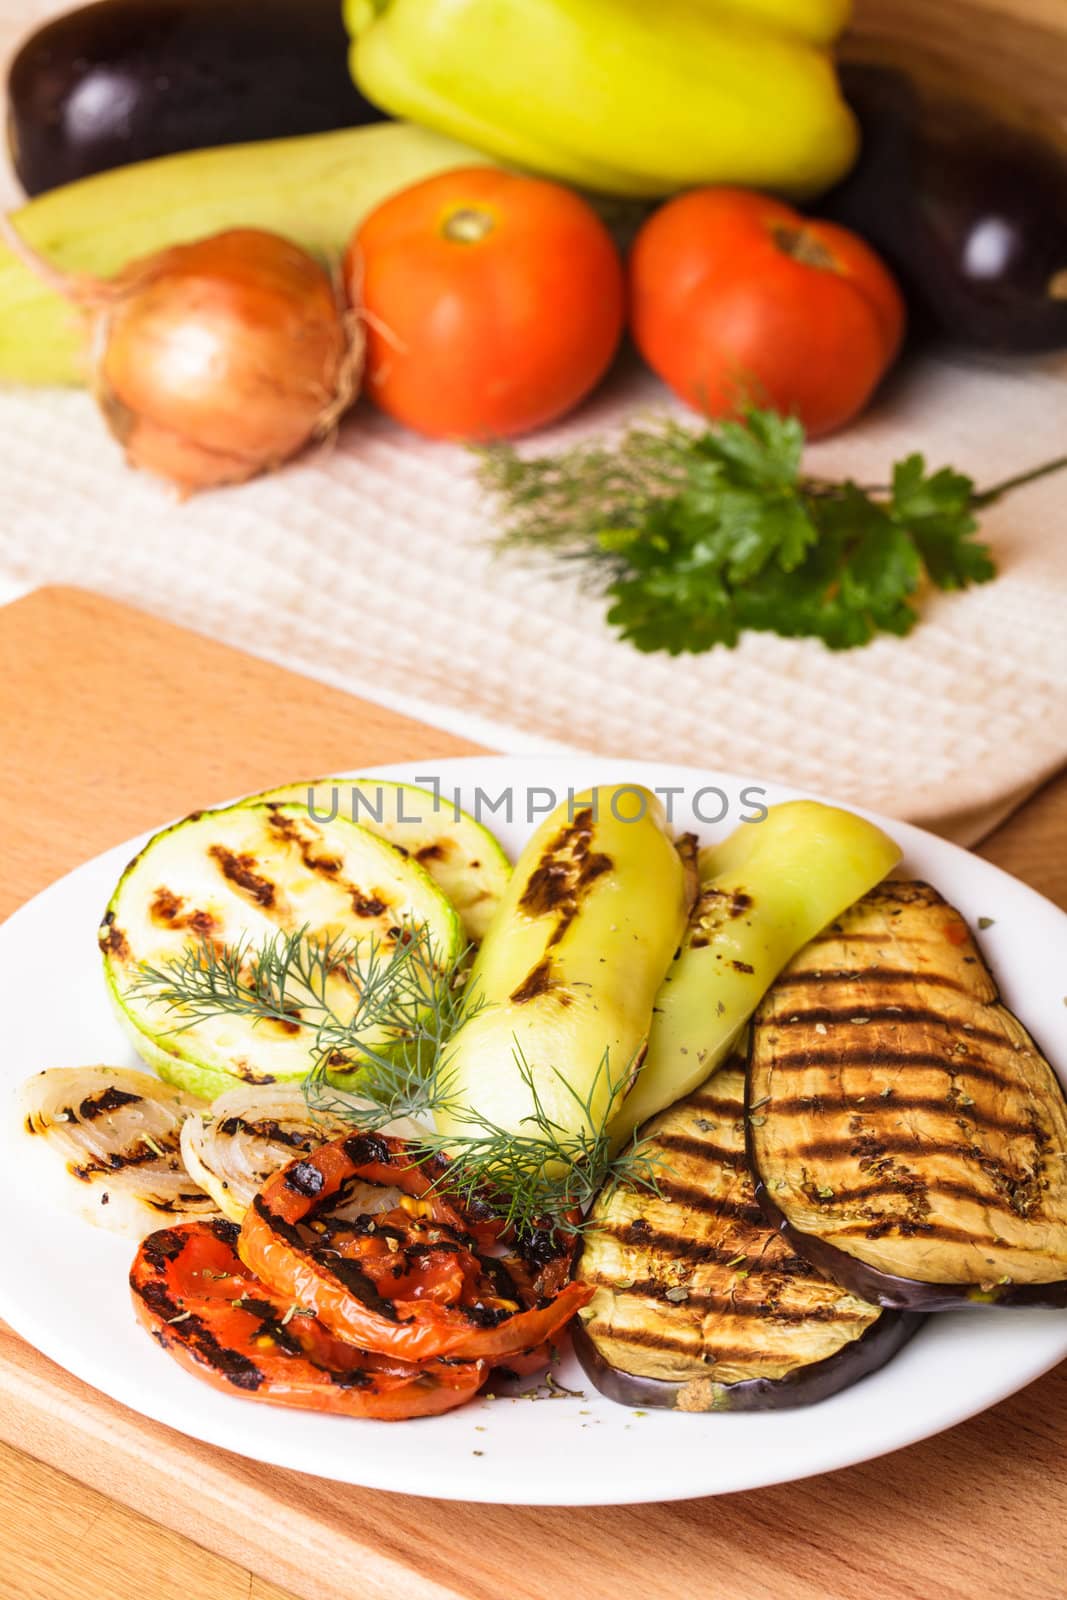 Grilled vegetables by oksix